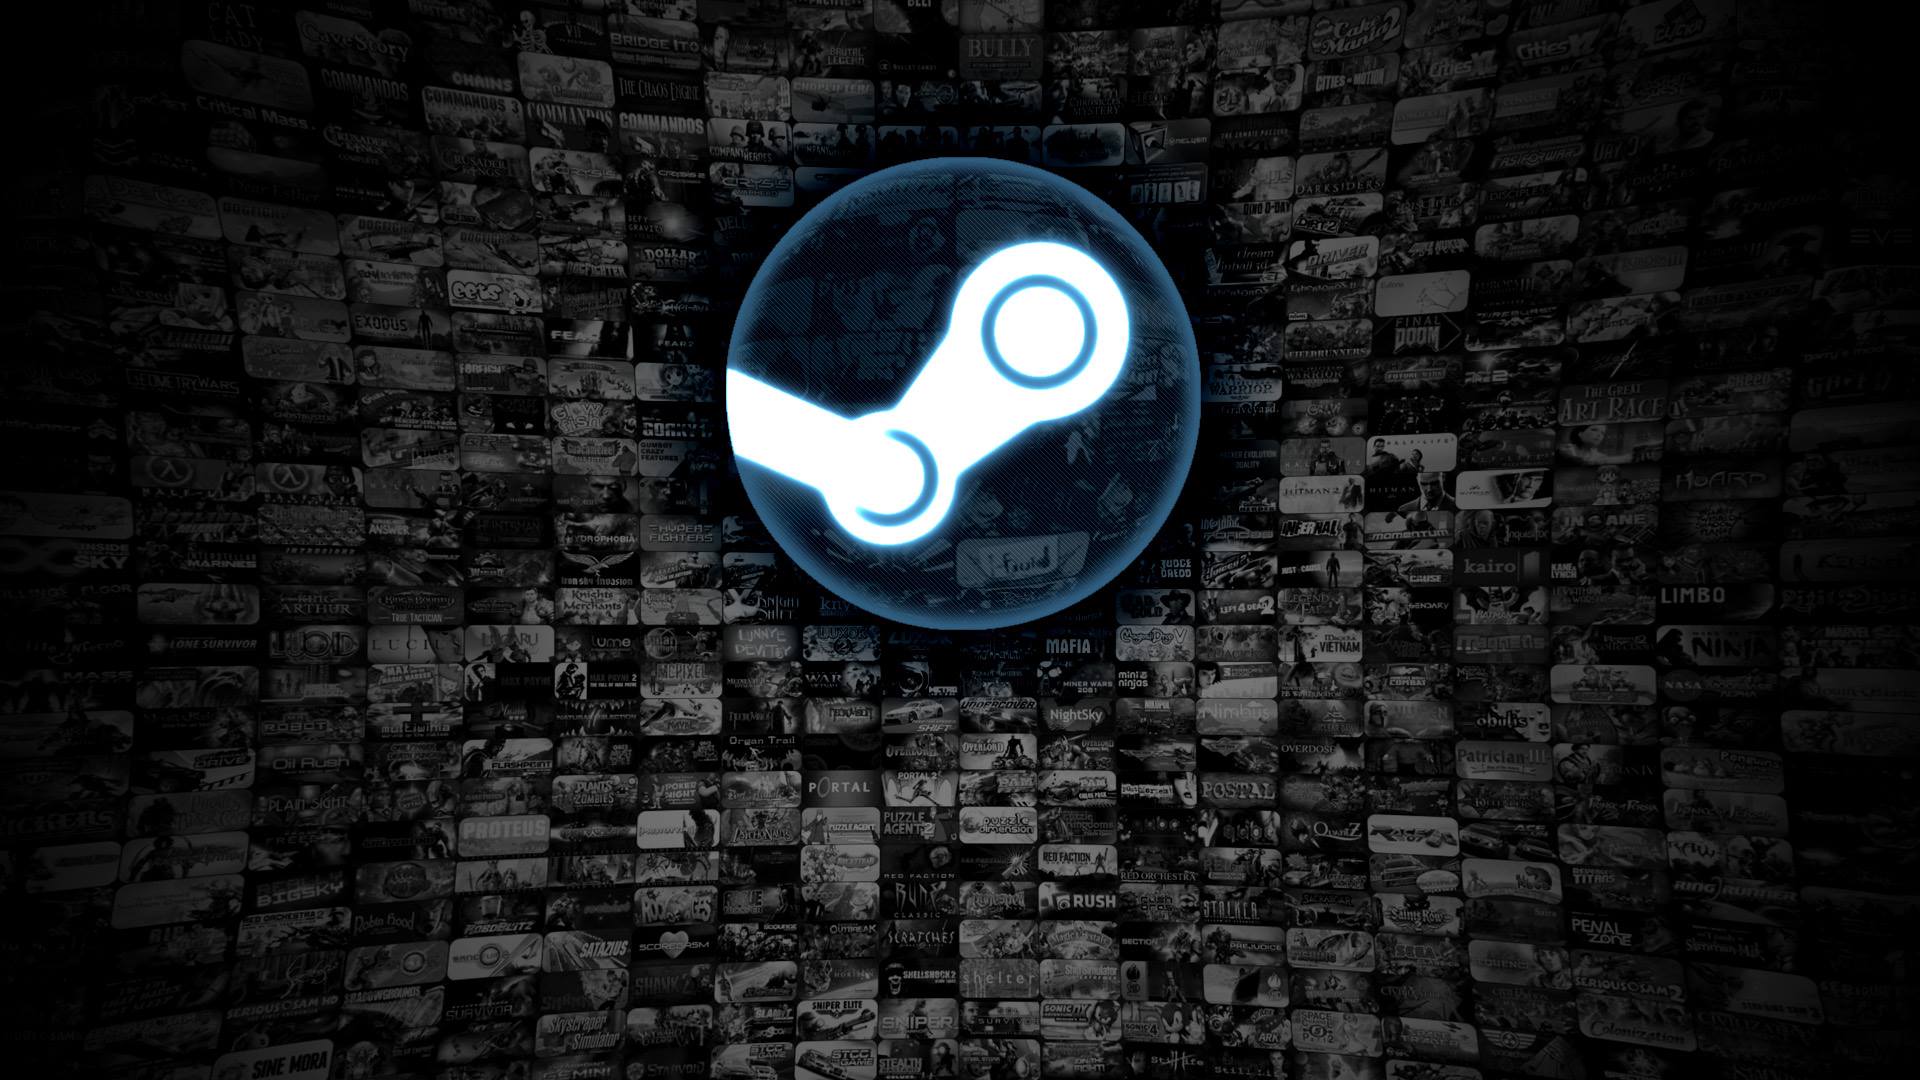 Steam reports a 'continuous increase in the number of games achieving  success on Steam' in 2019 - MCV/DEVELOP